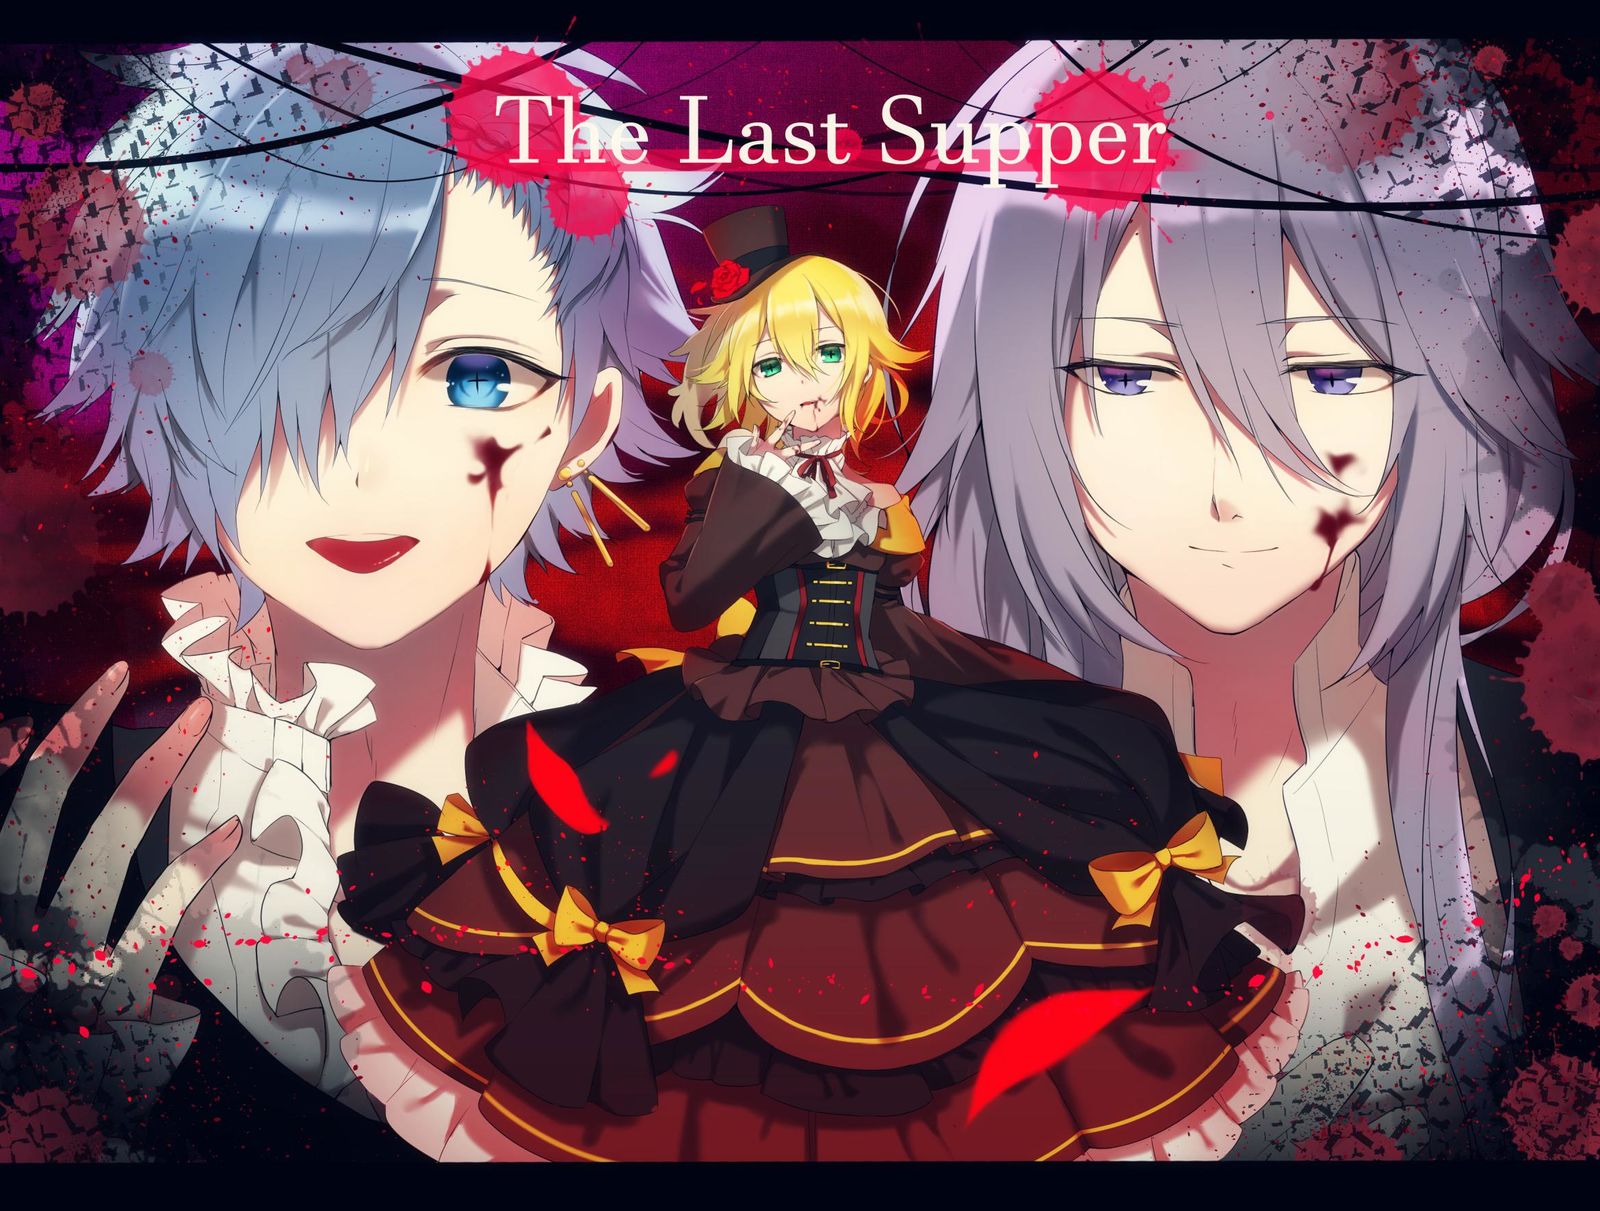 ※The Last Supper